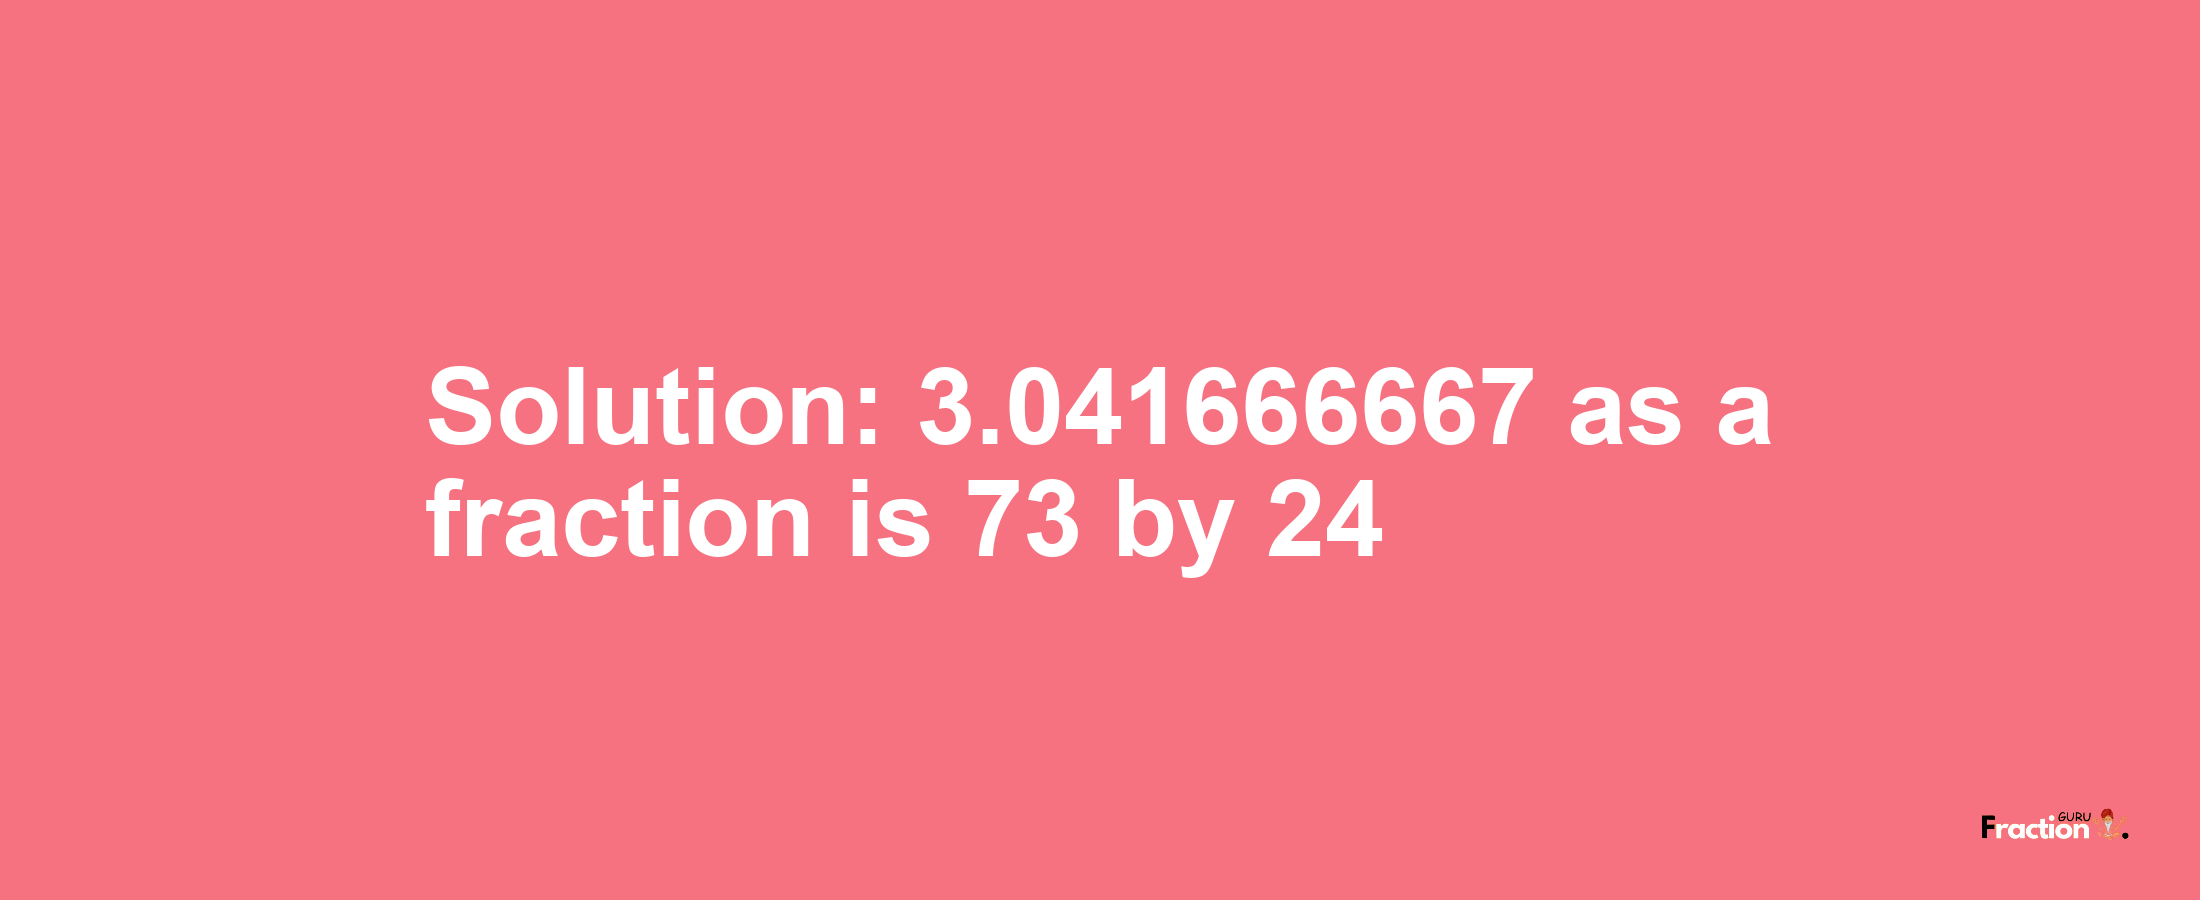 Solution:3.041666667 as a fraction is 73/24